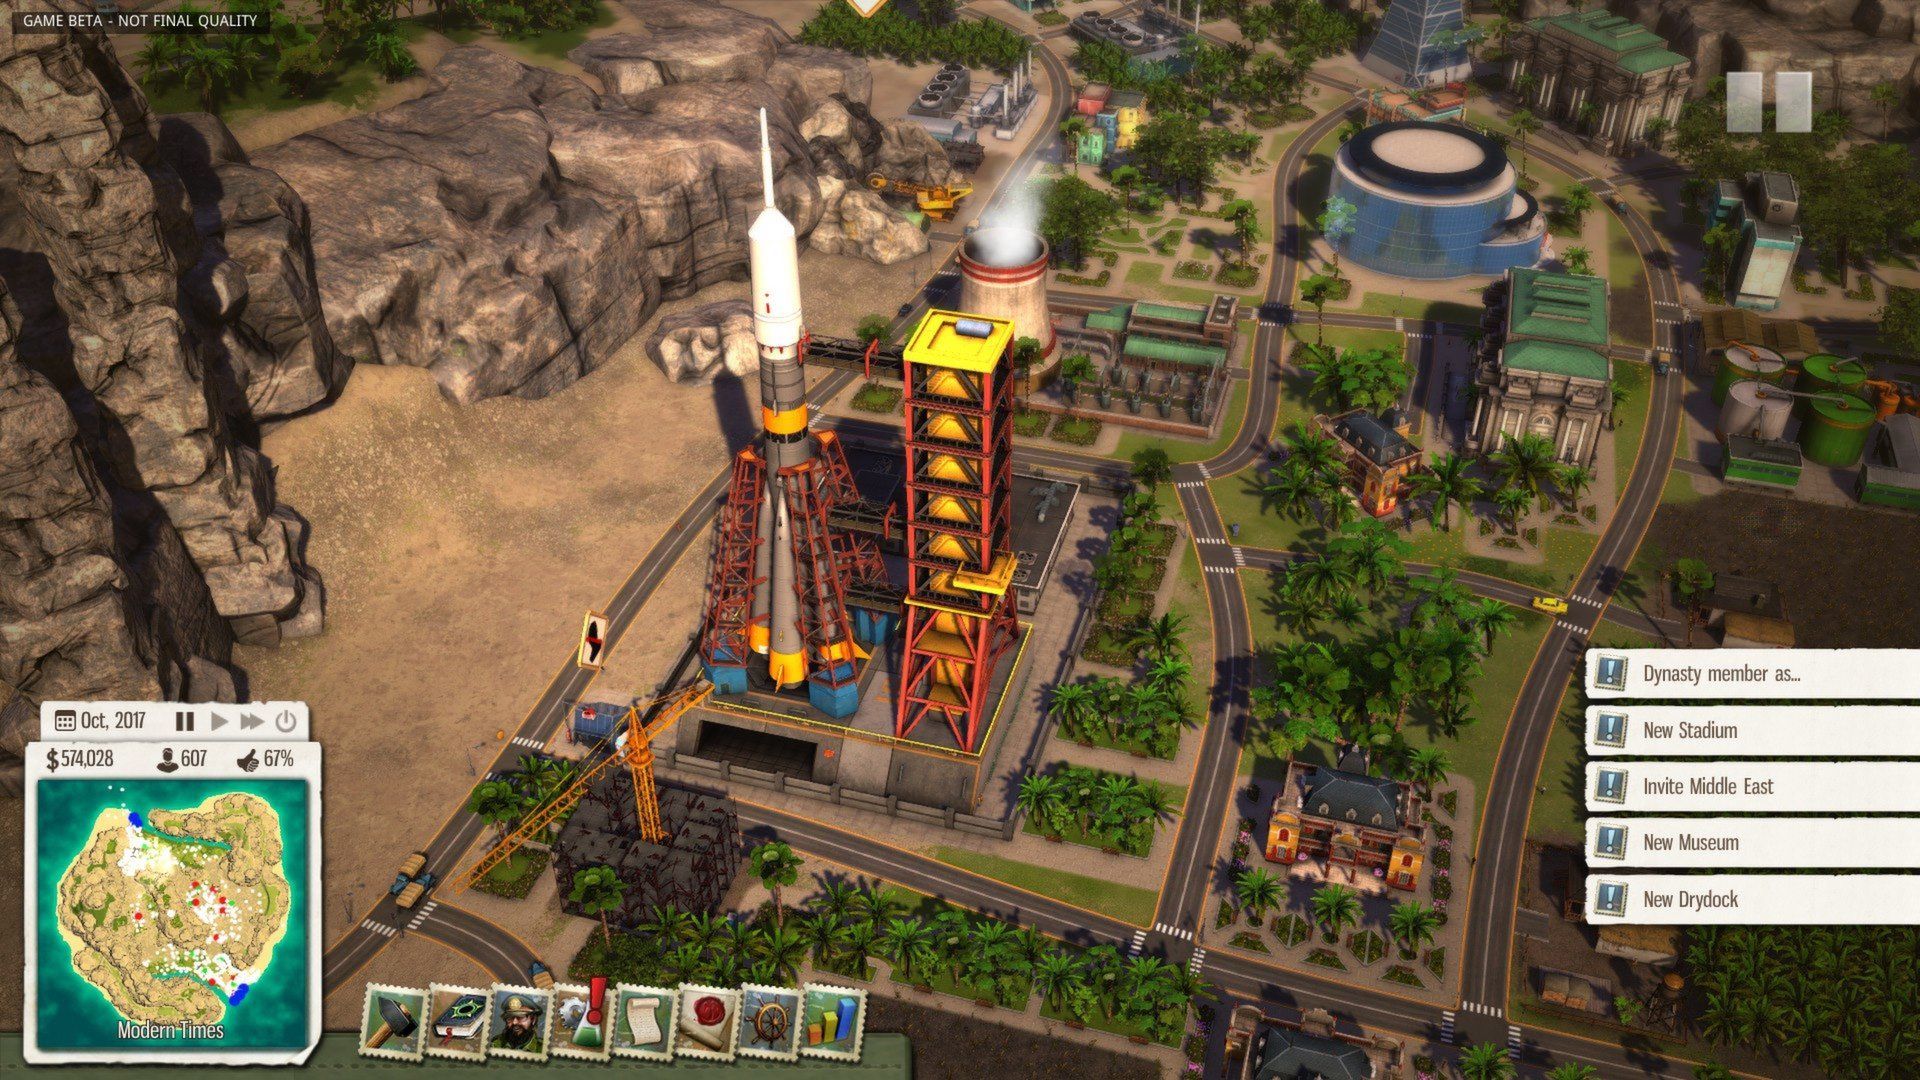 Tropico 5 is free on the Epic Games Store and here's what to expect for the rest of the giveaway